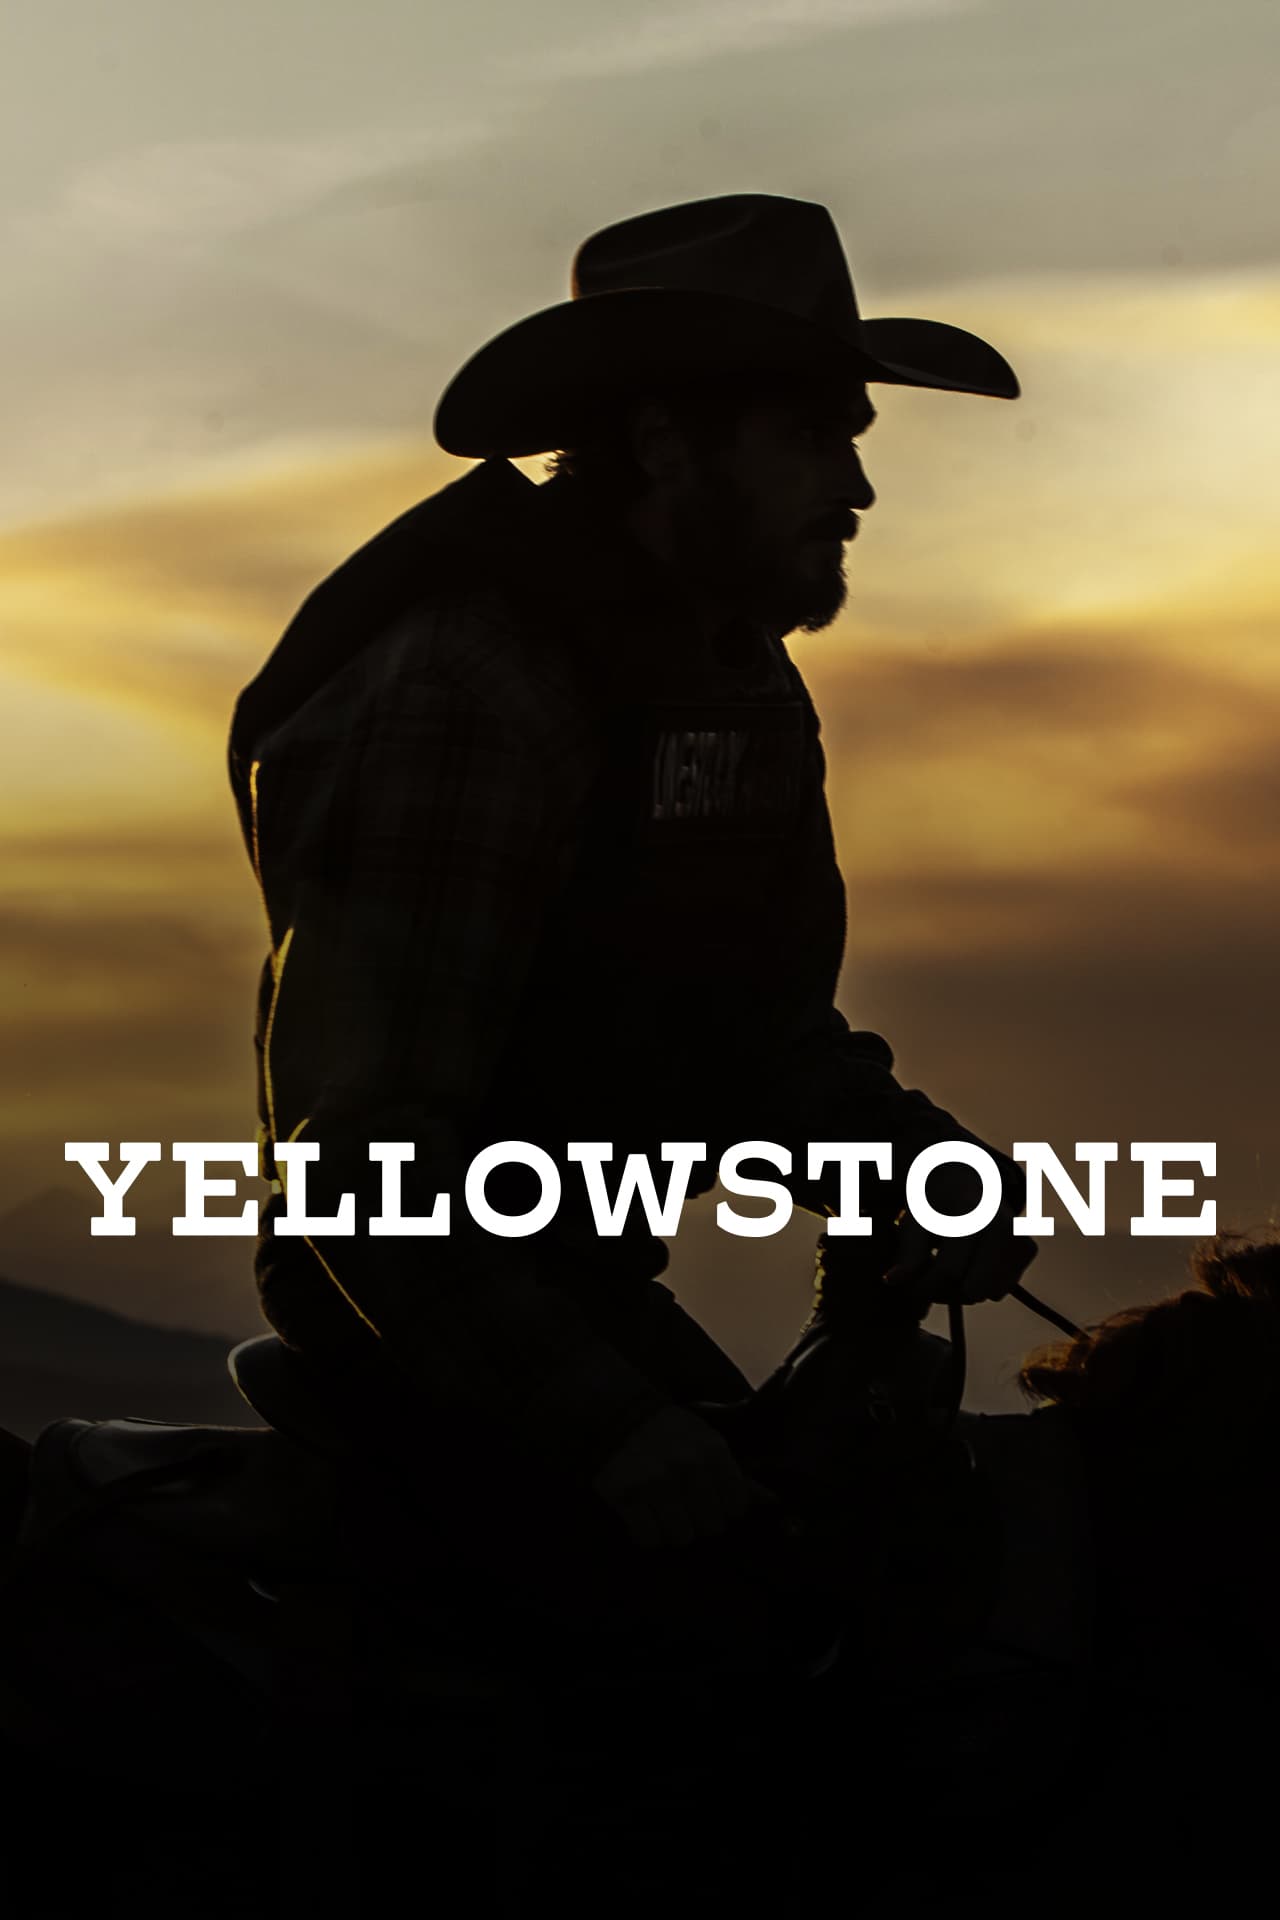 who died in yellowstone season 1 episode 1